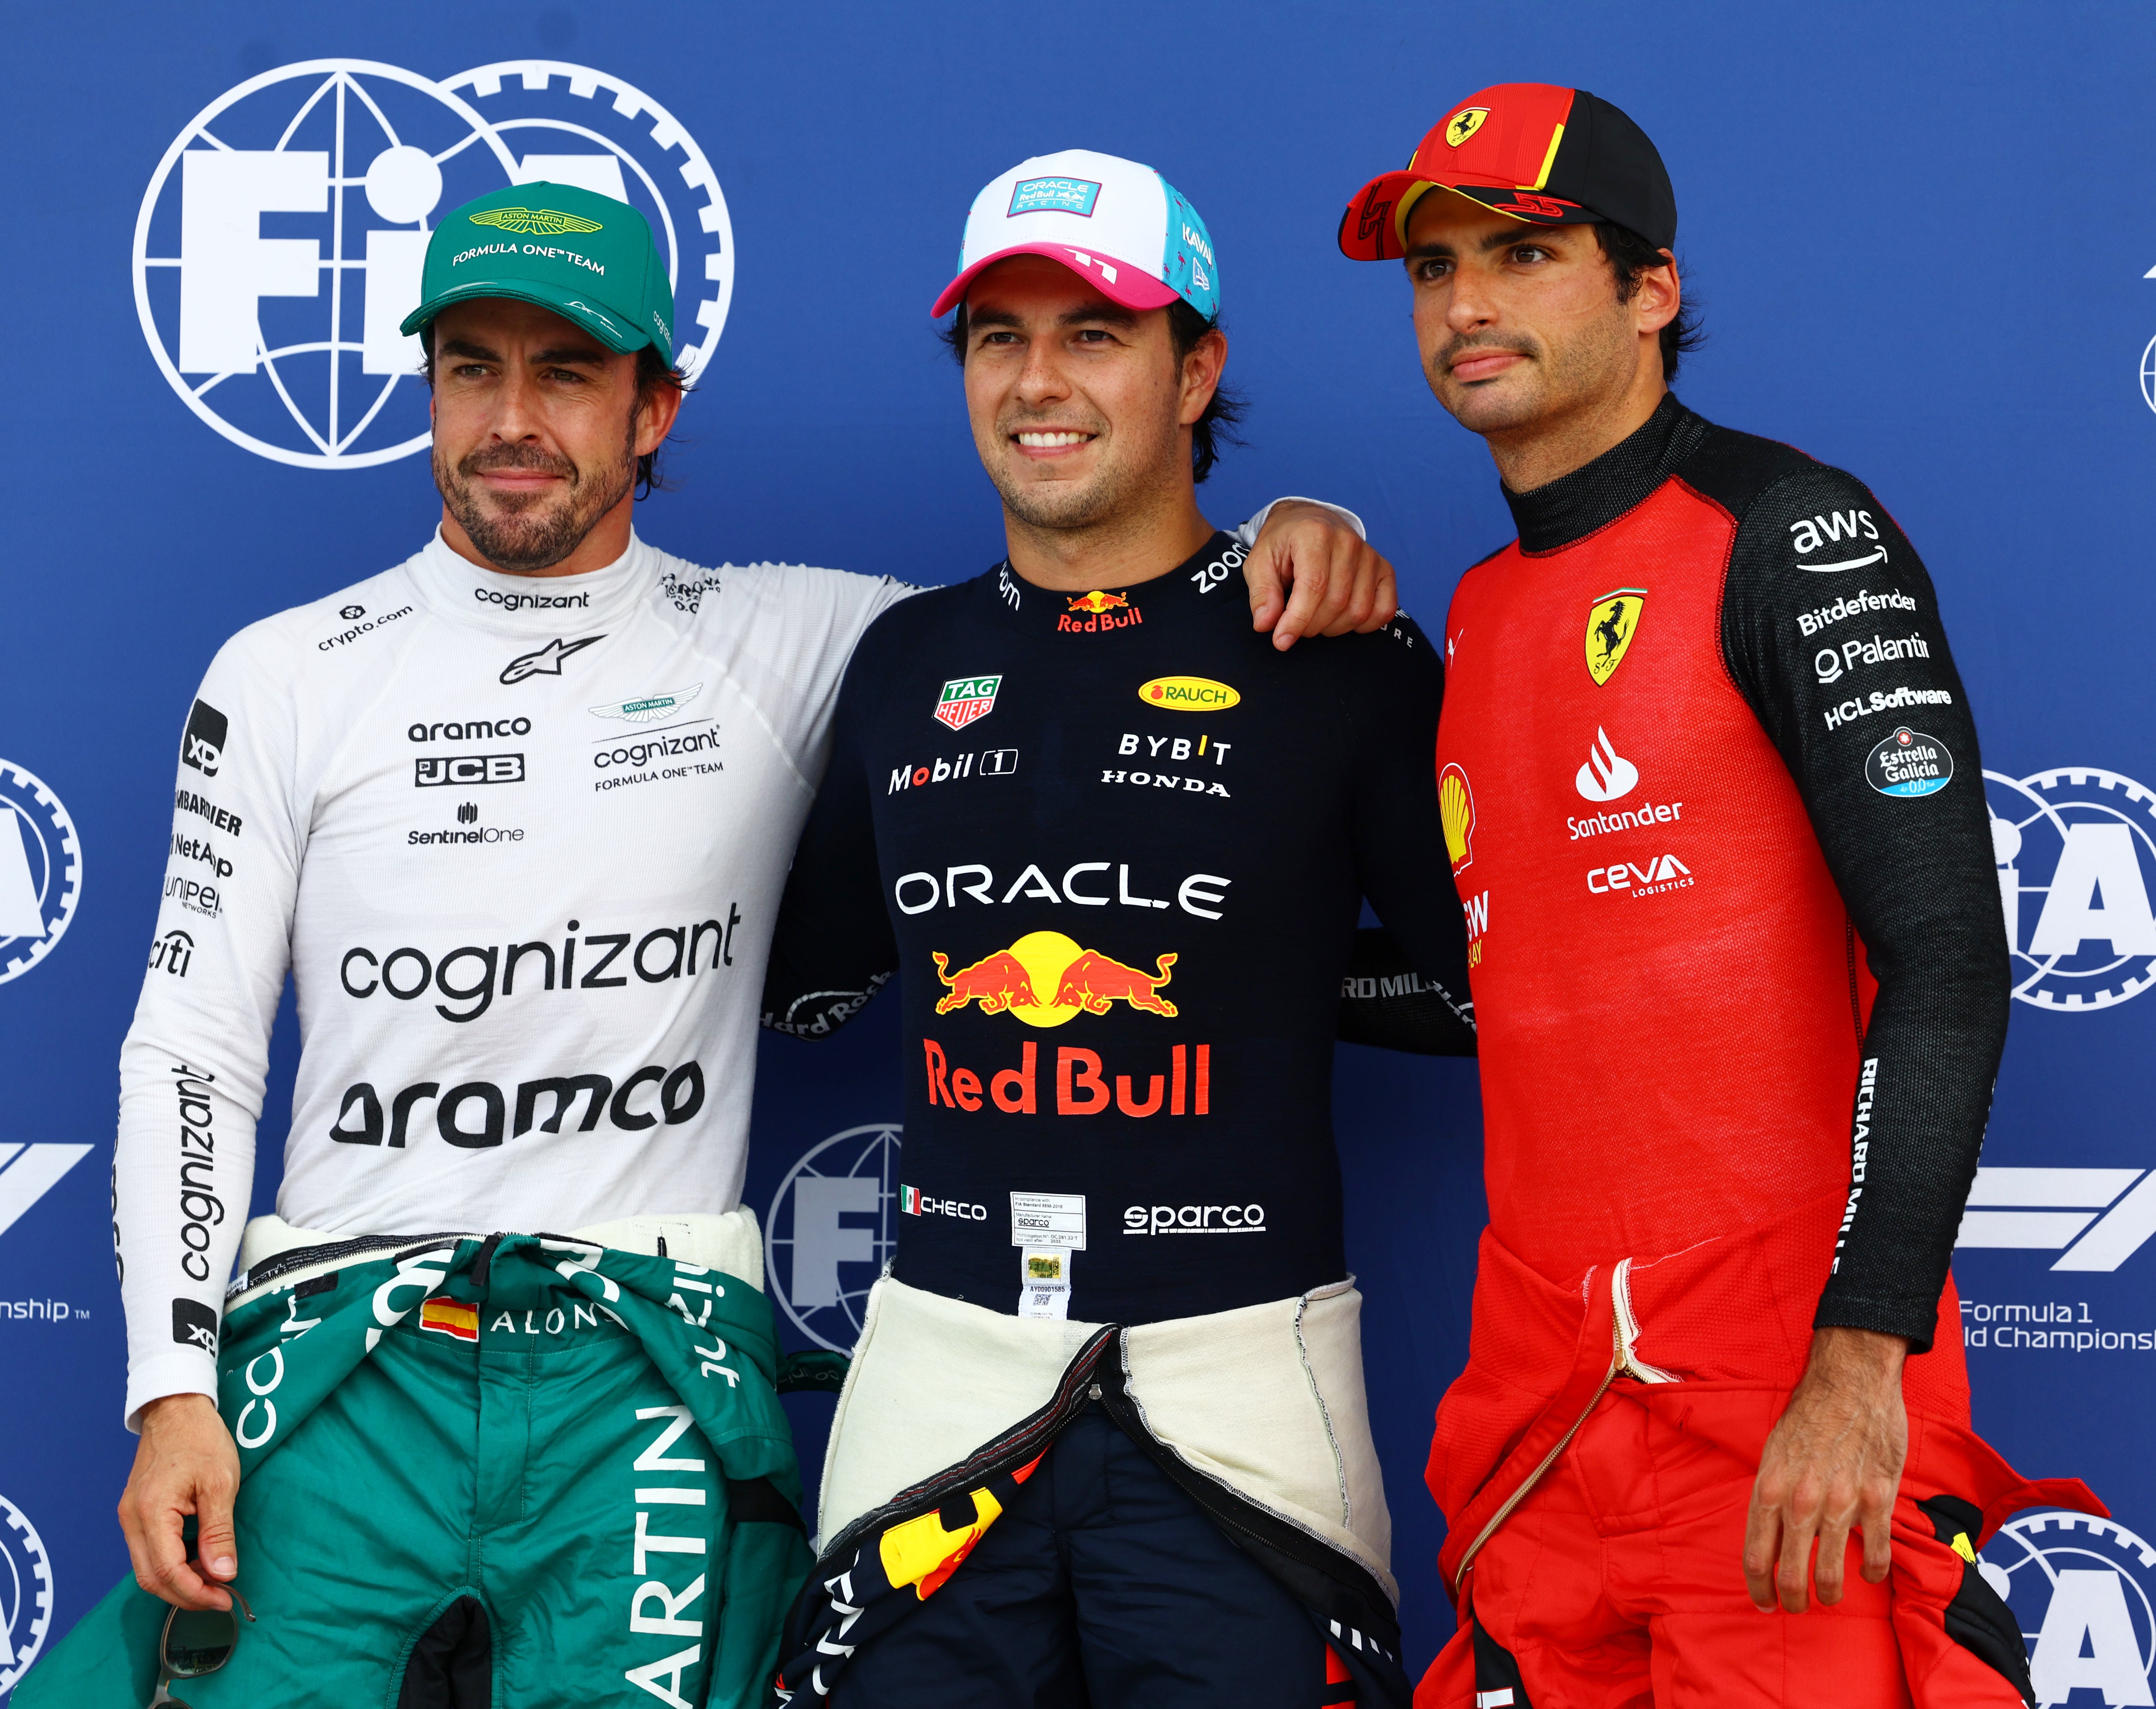 Sergio Perez is on pole, with Fernando Alonso second and Carlos Sainz third